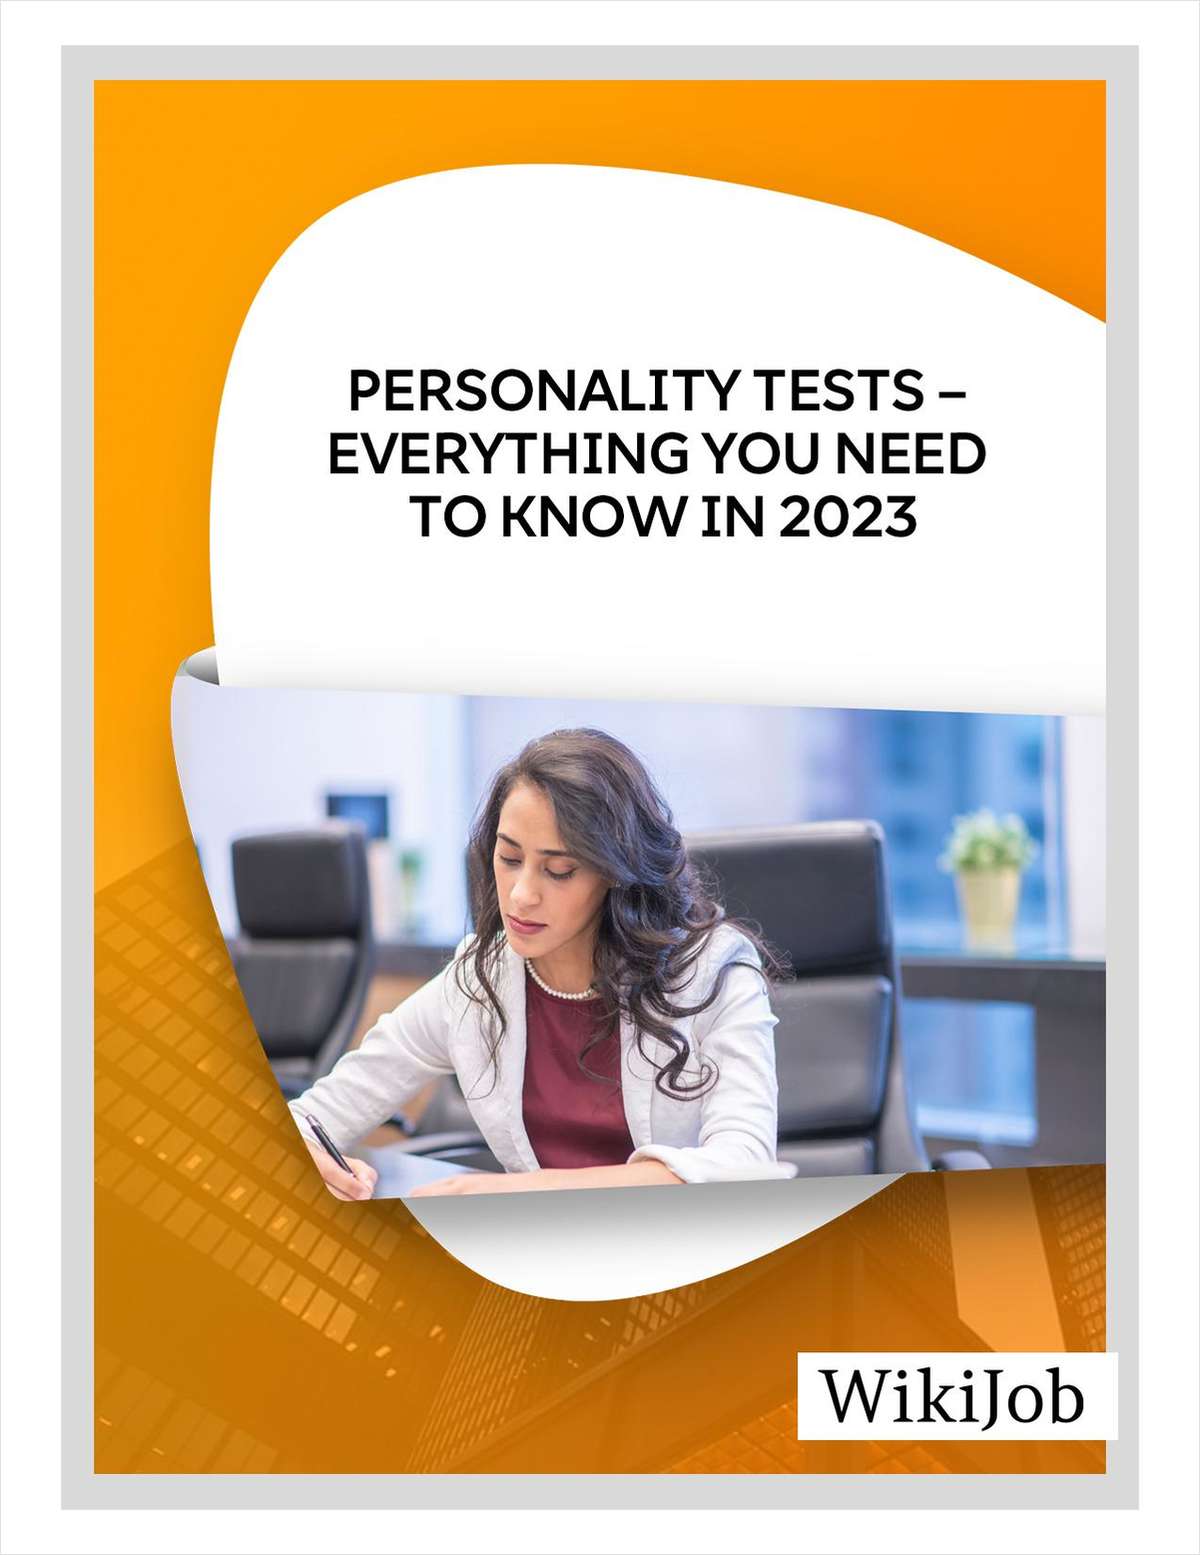 Personality Tests -- Everything You Need to Know in 2023